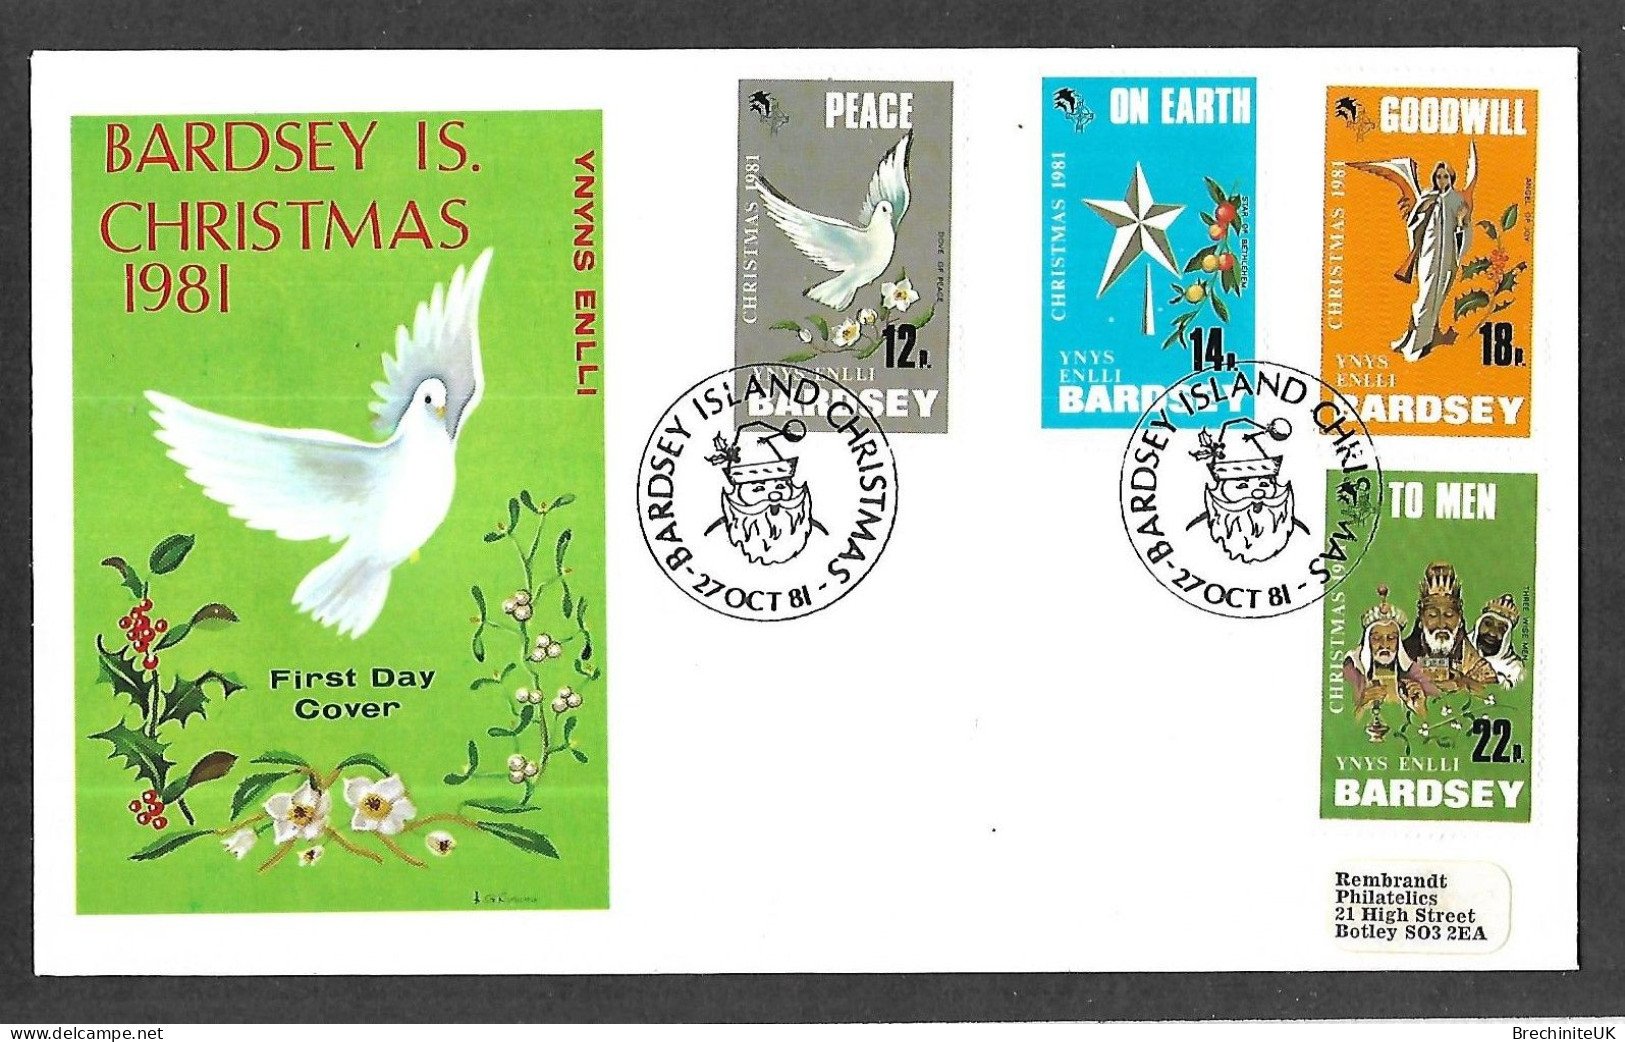 (N579) Great Britain BARDSEY ISLAND, 1981 Christmas Stamp  FDC - Local Issues